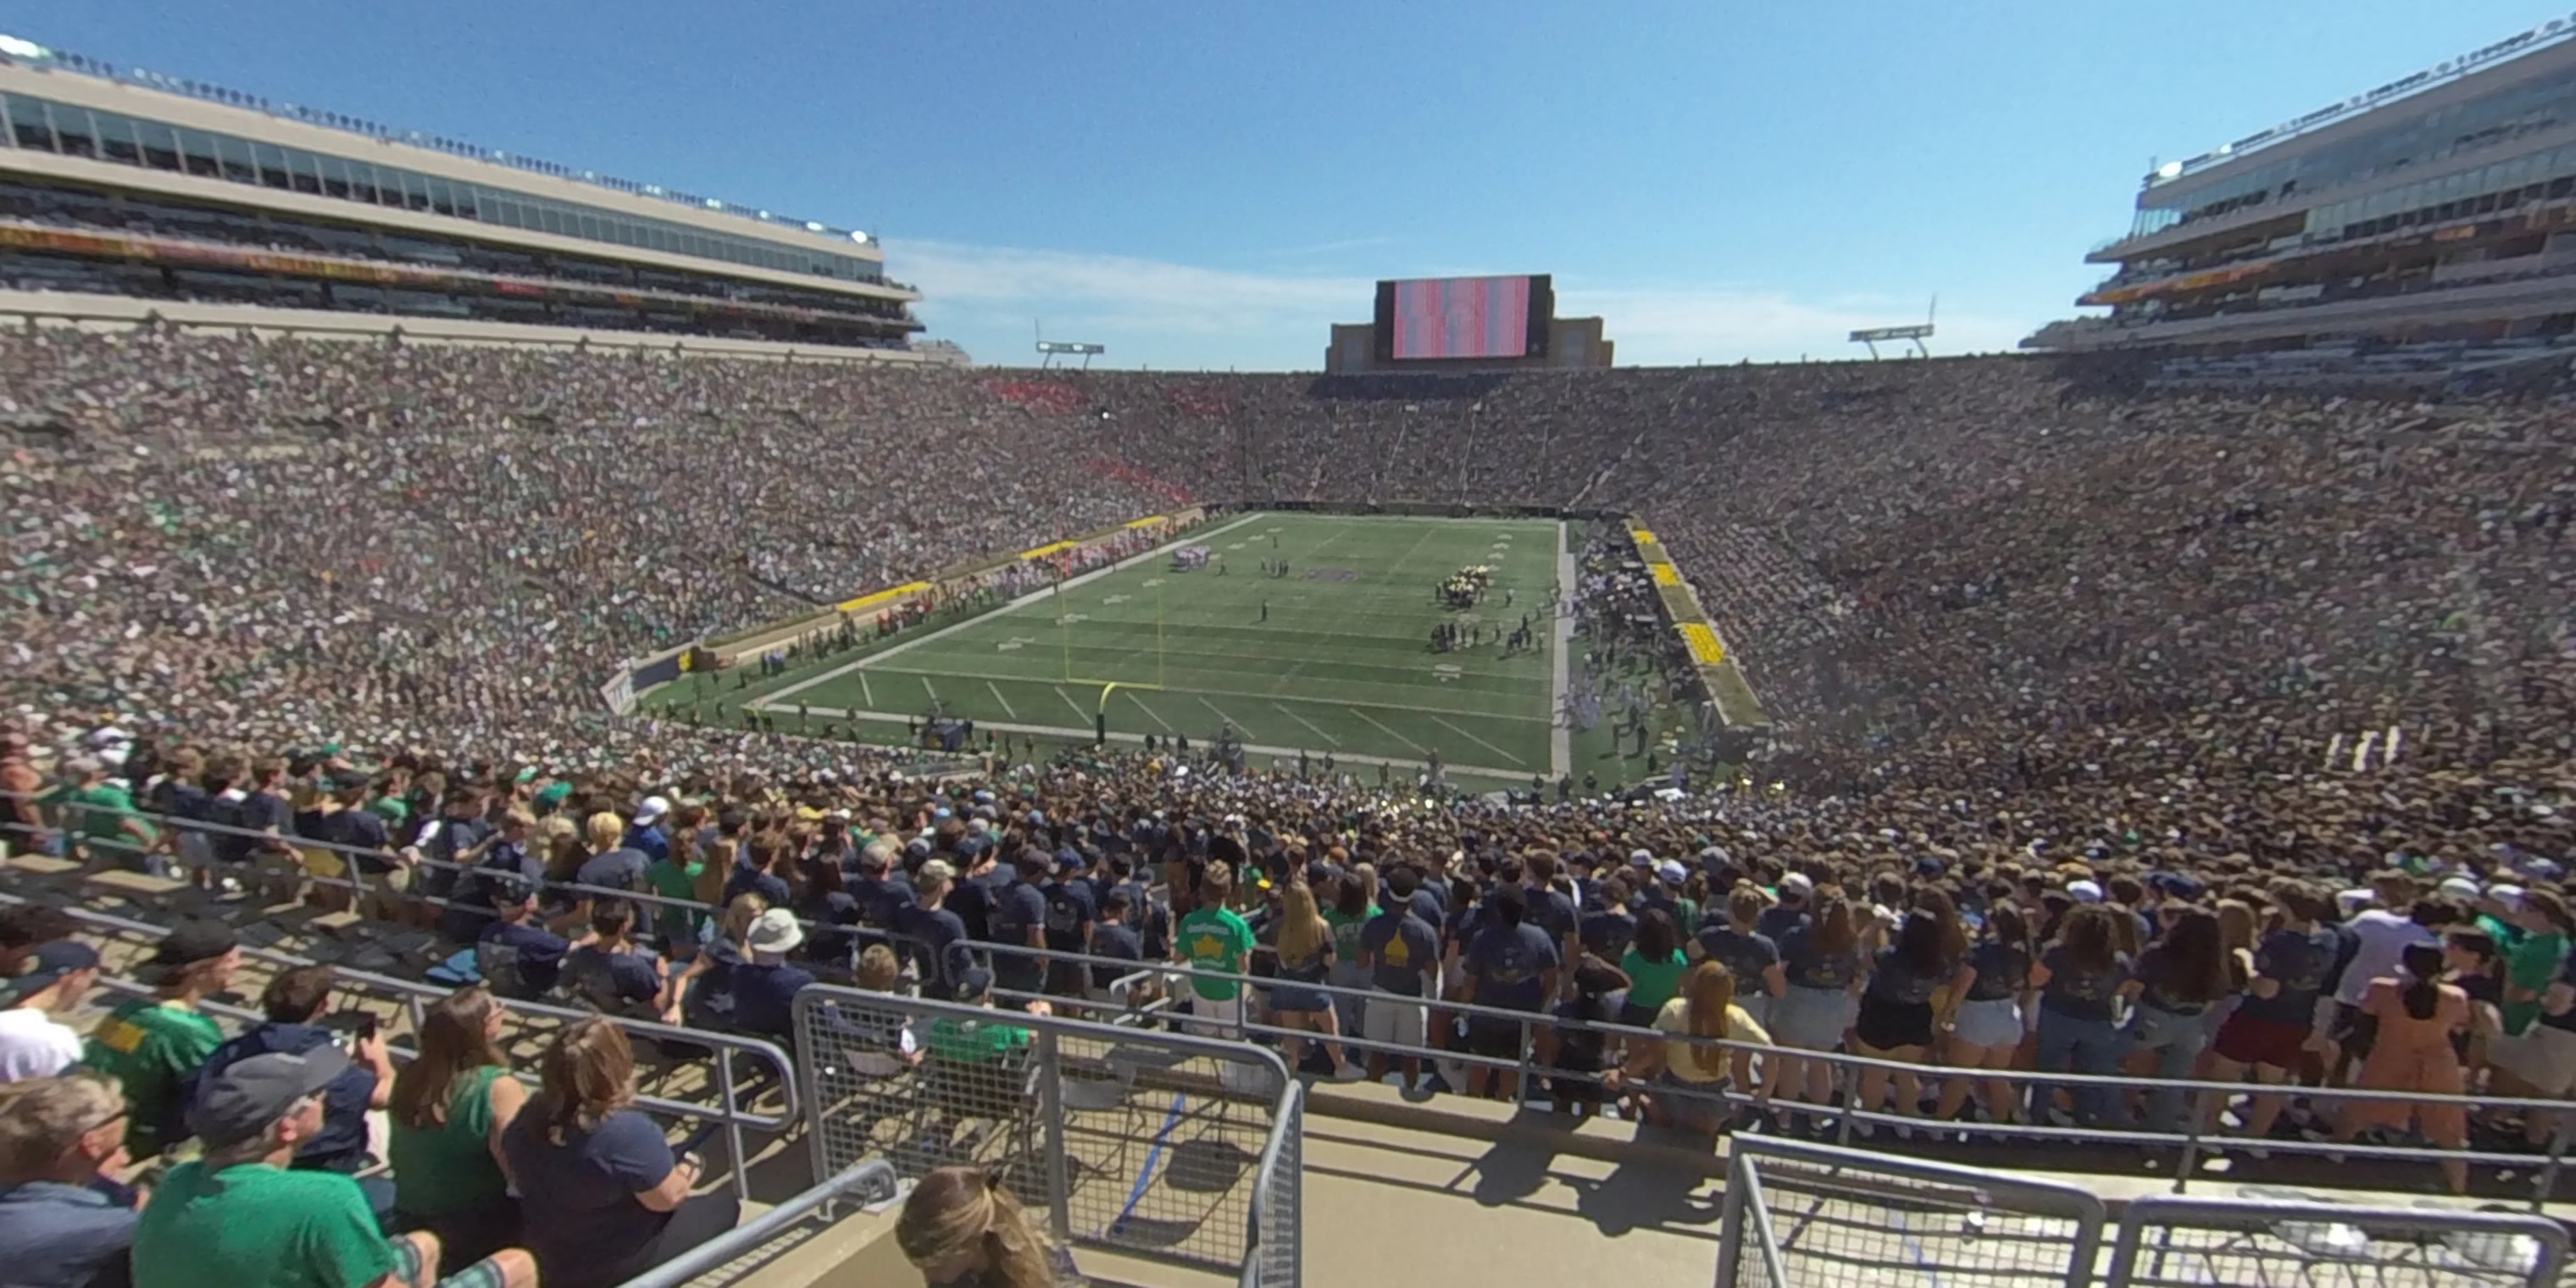 section 135 panoramic seat view  - notre dame stadium